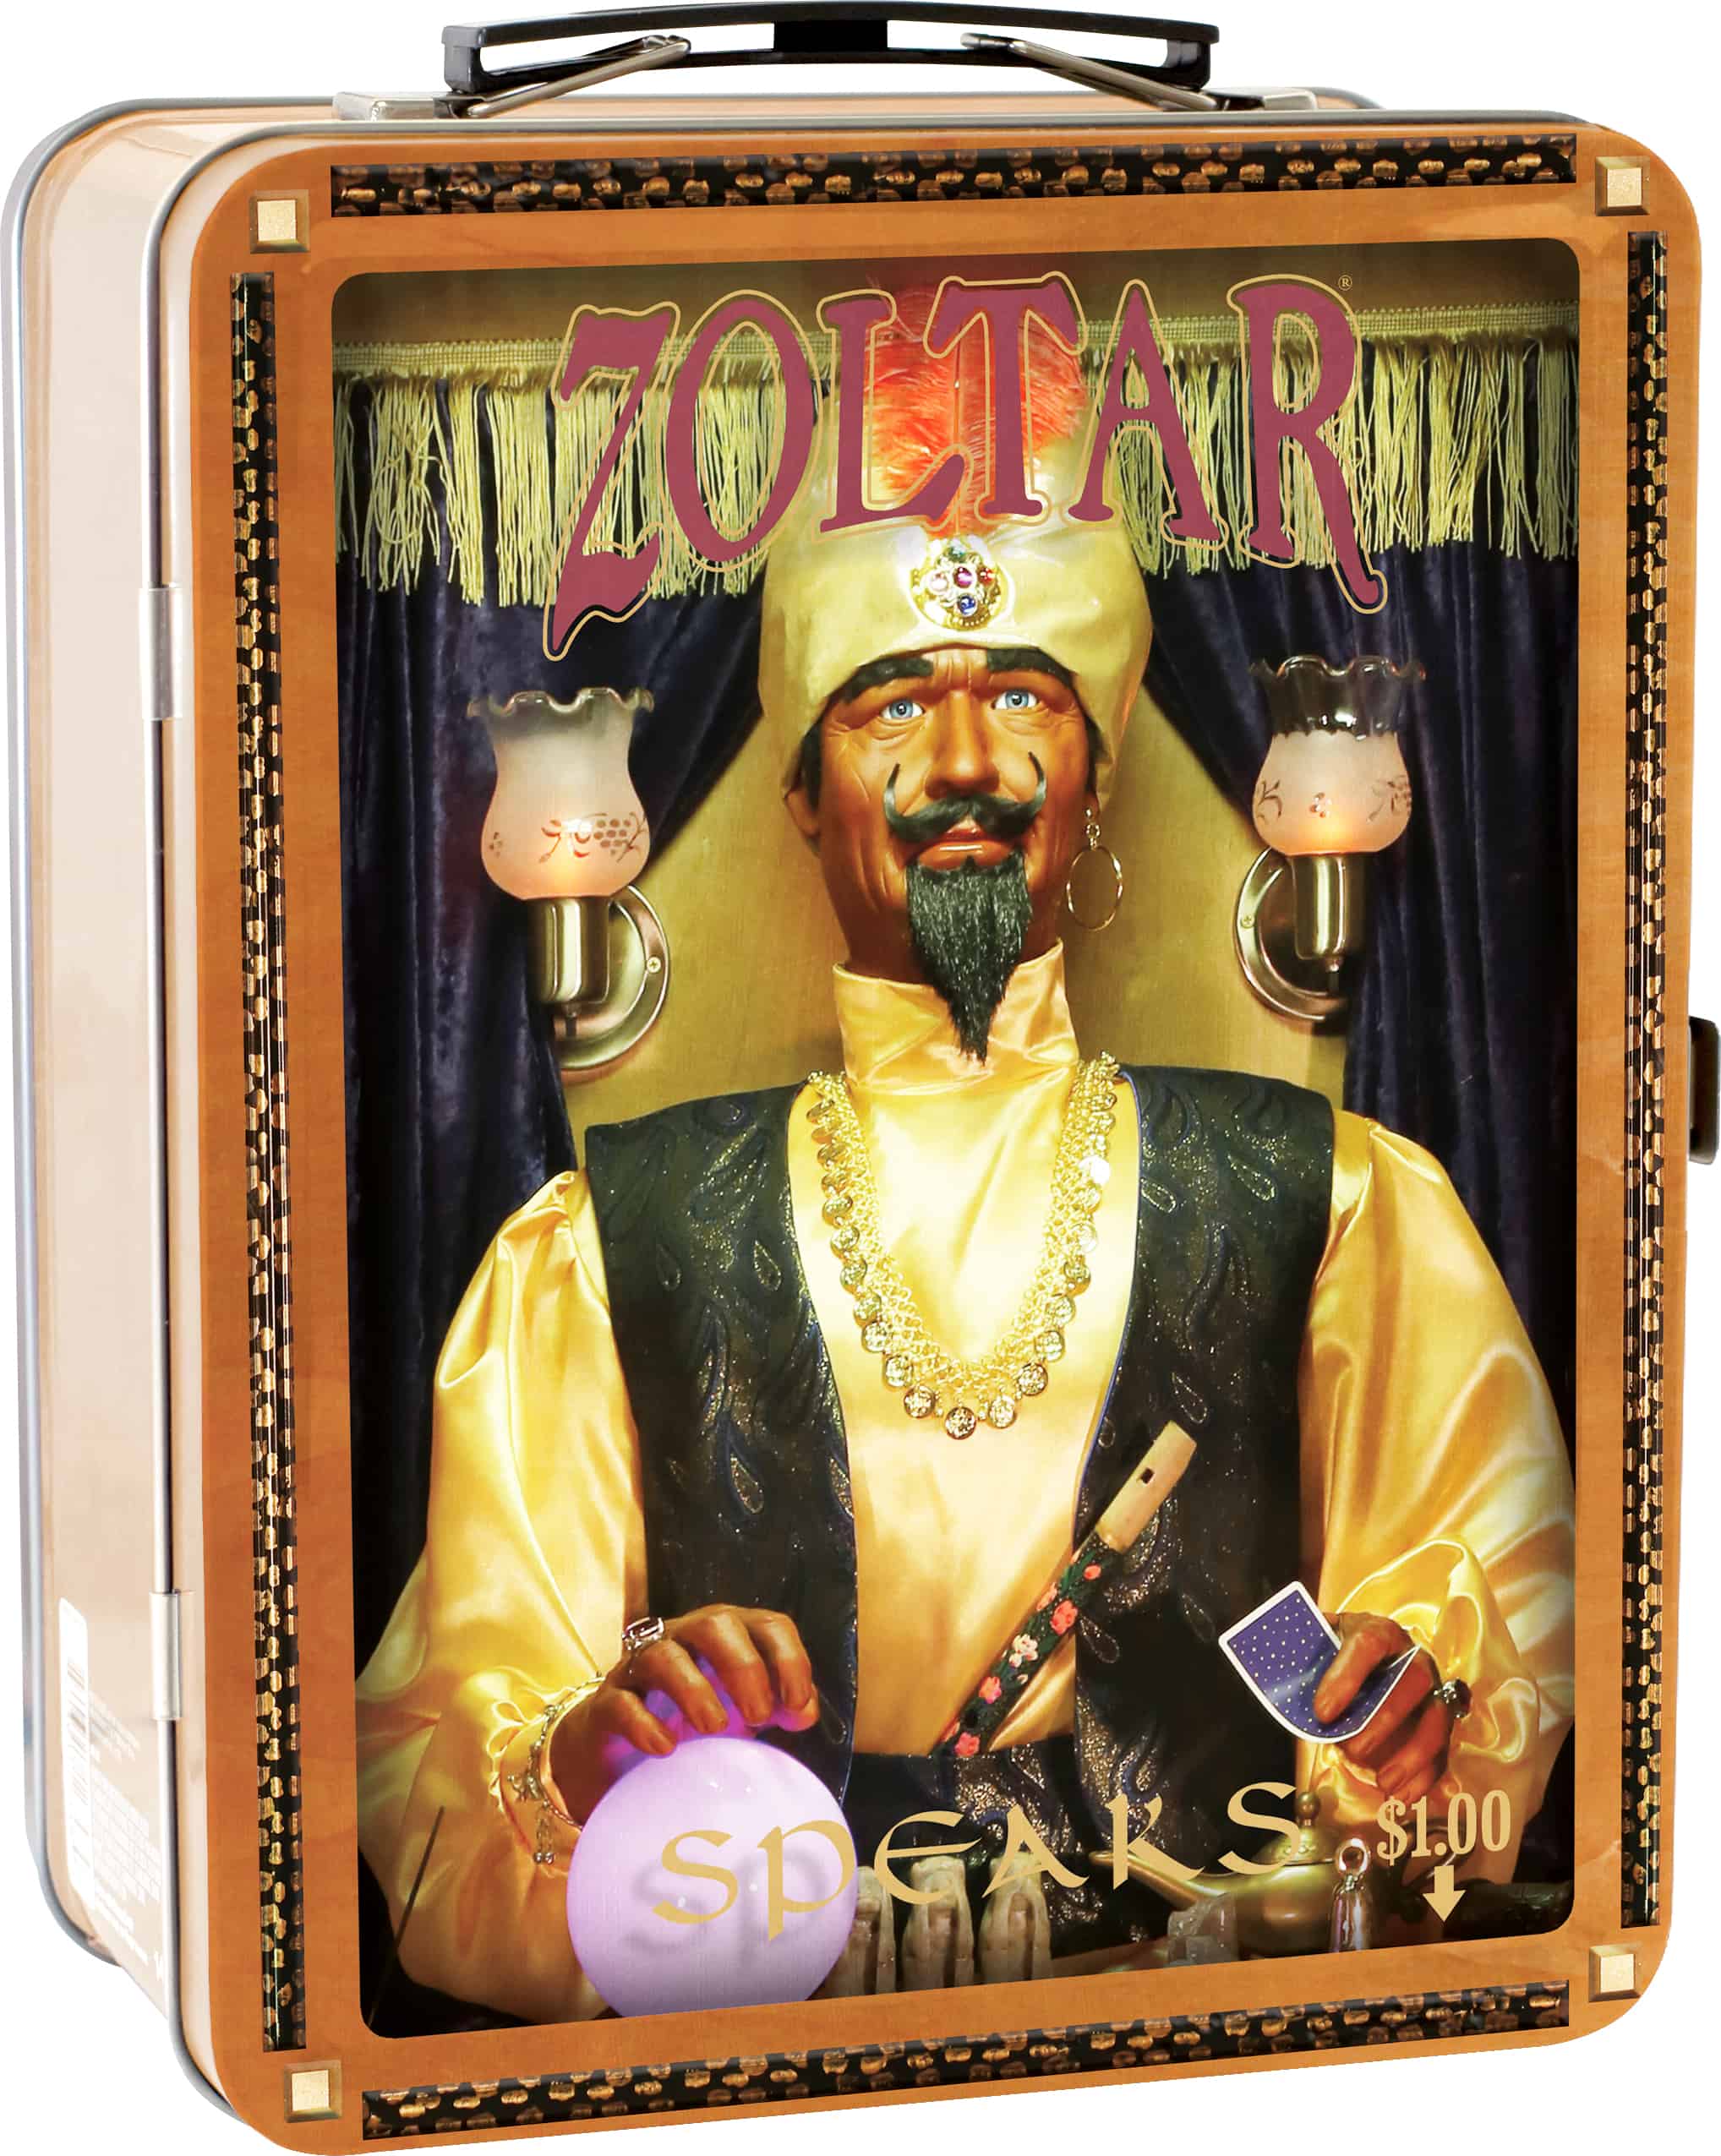 Aquarius (NMR) Debuts Zoltar Lunch Box, Talking Keychain, & Other Licensed Products at Toy Fair, New York